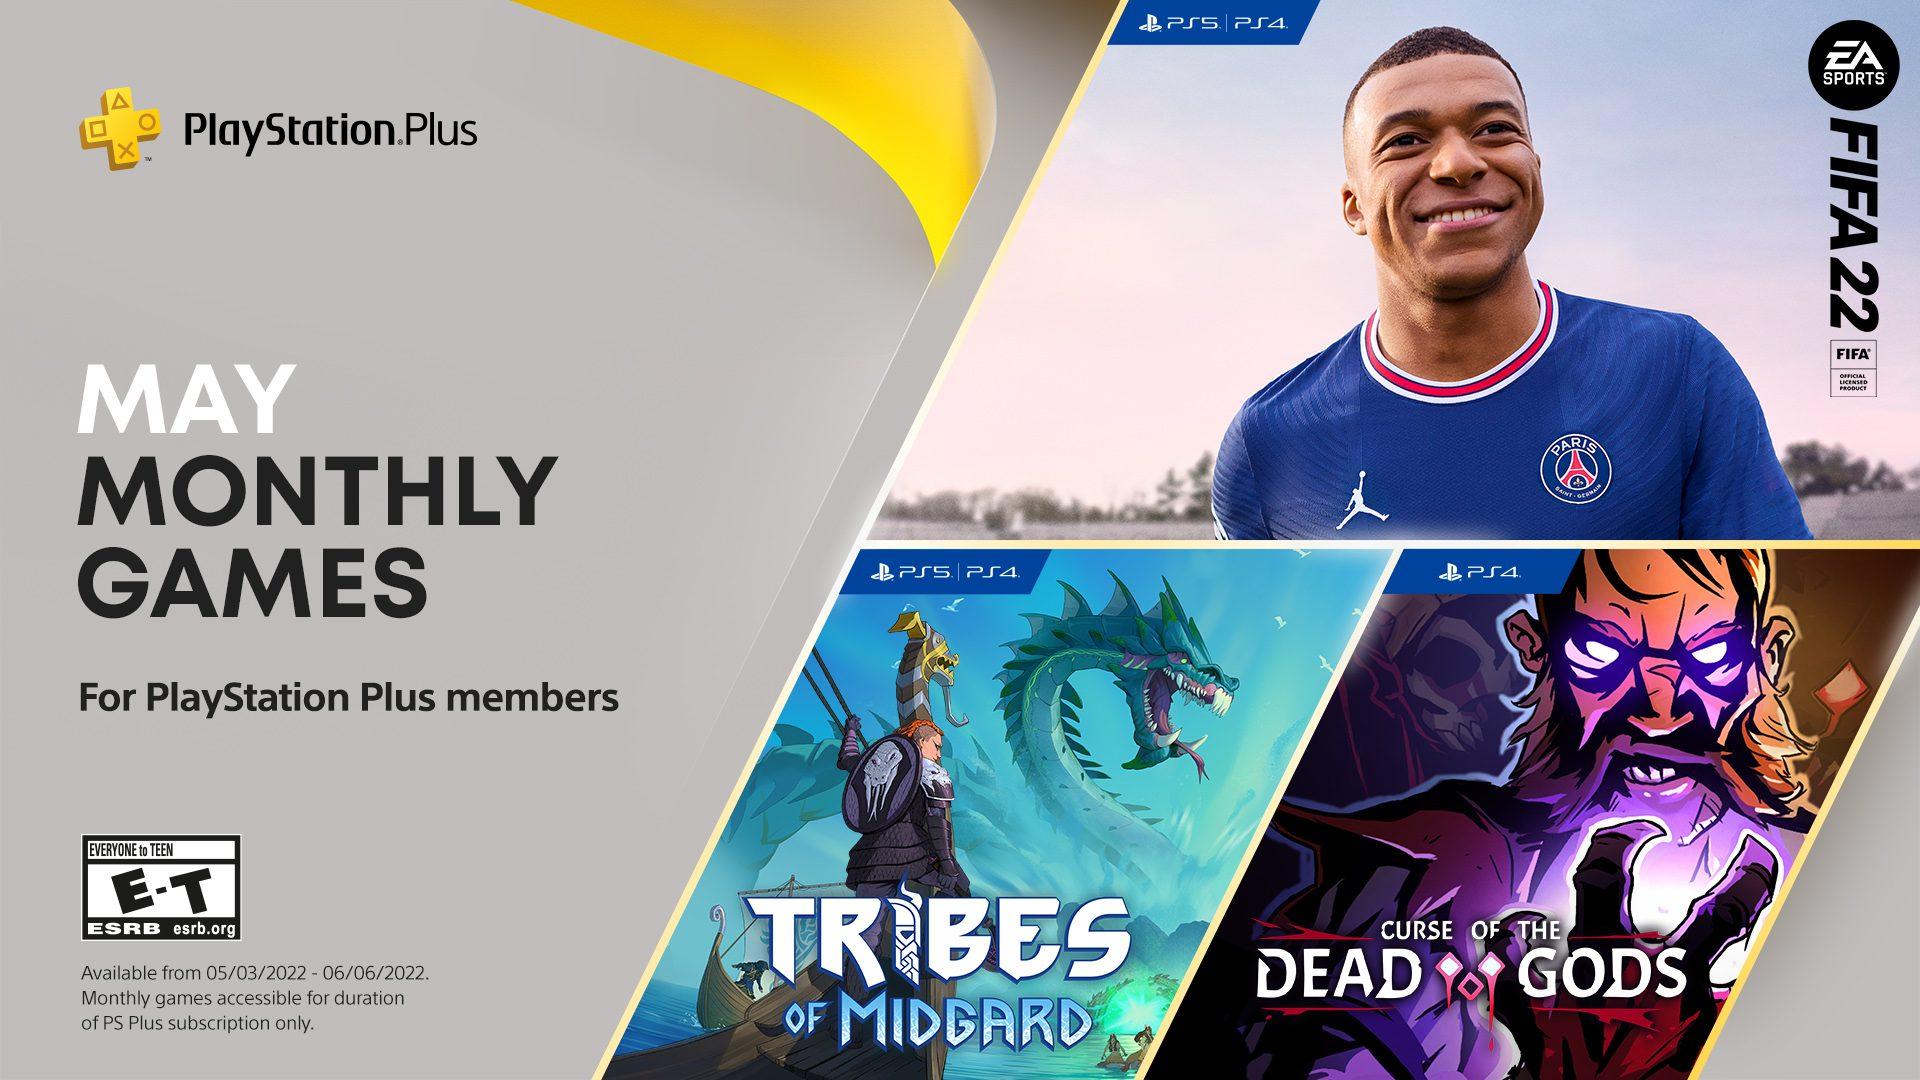 Play the Best Football Games with PlayStation Plus